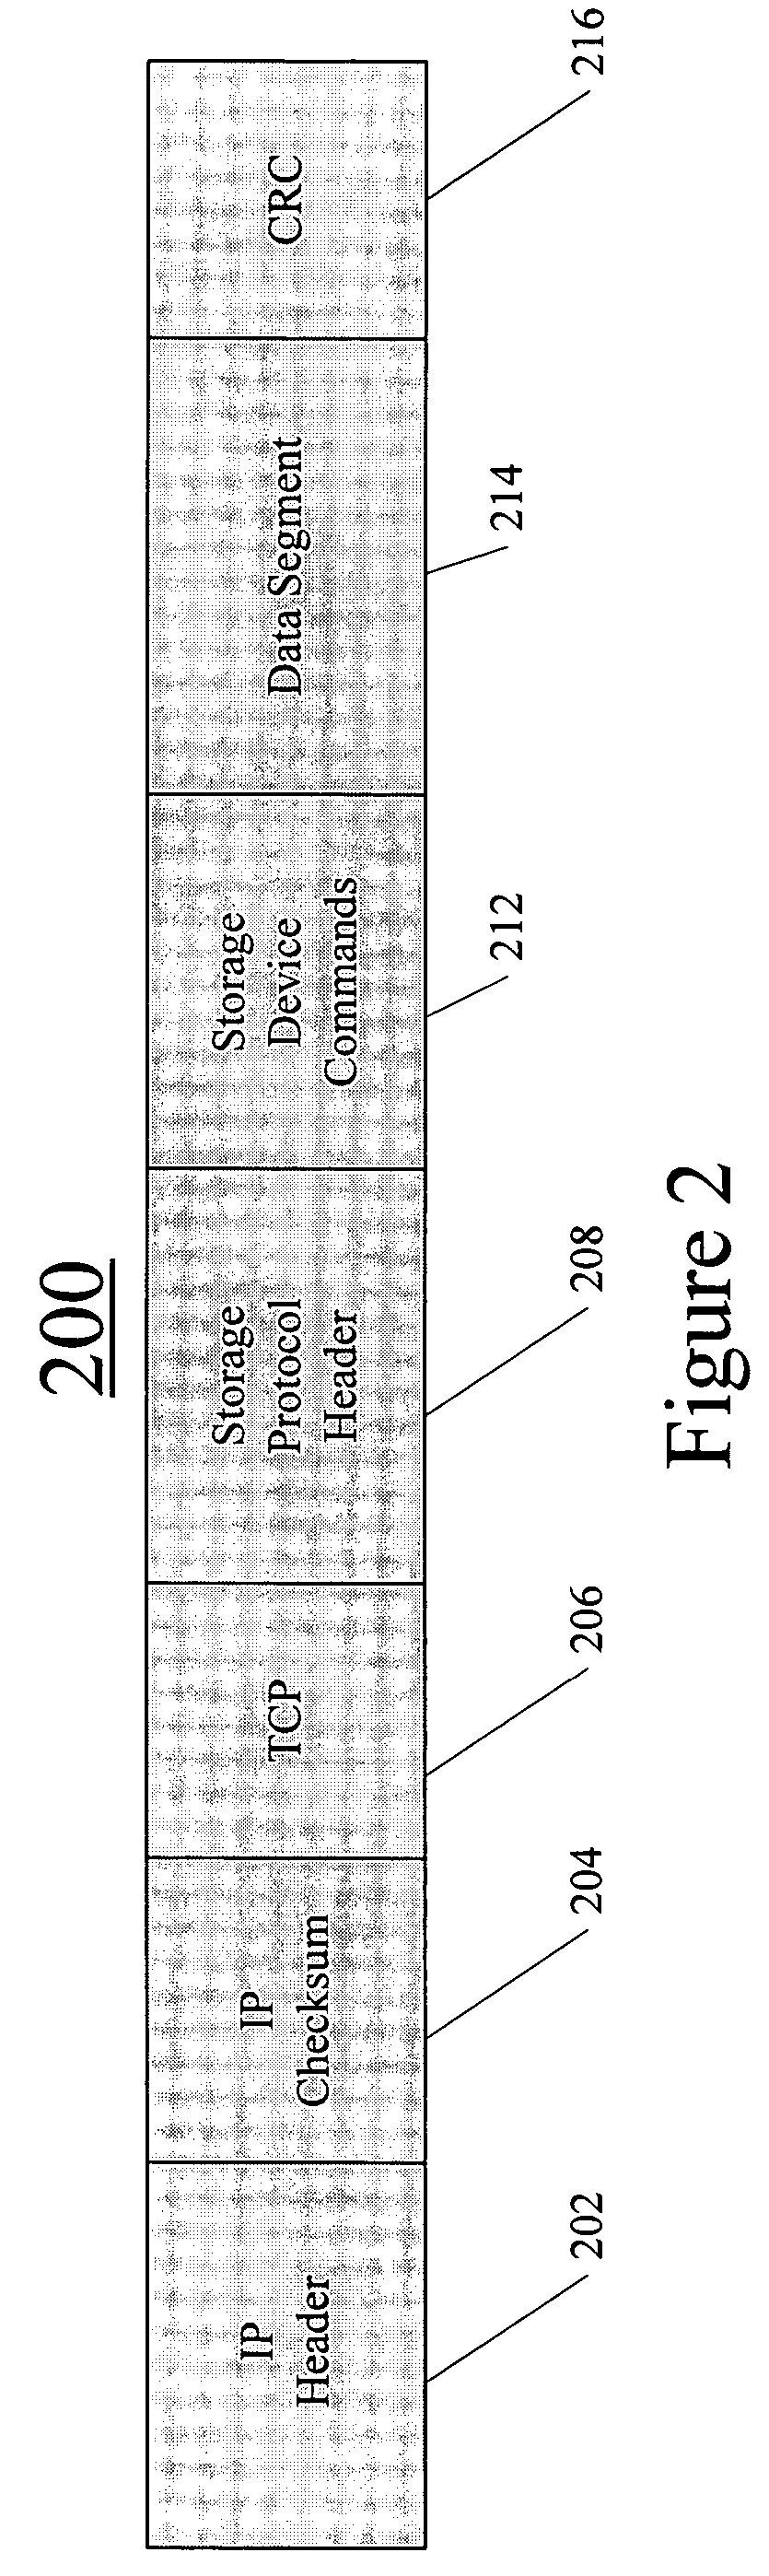 System and method for generating 128-bit cyclic redundancy check values with 32-bit granularity